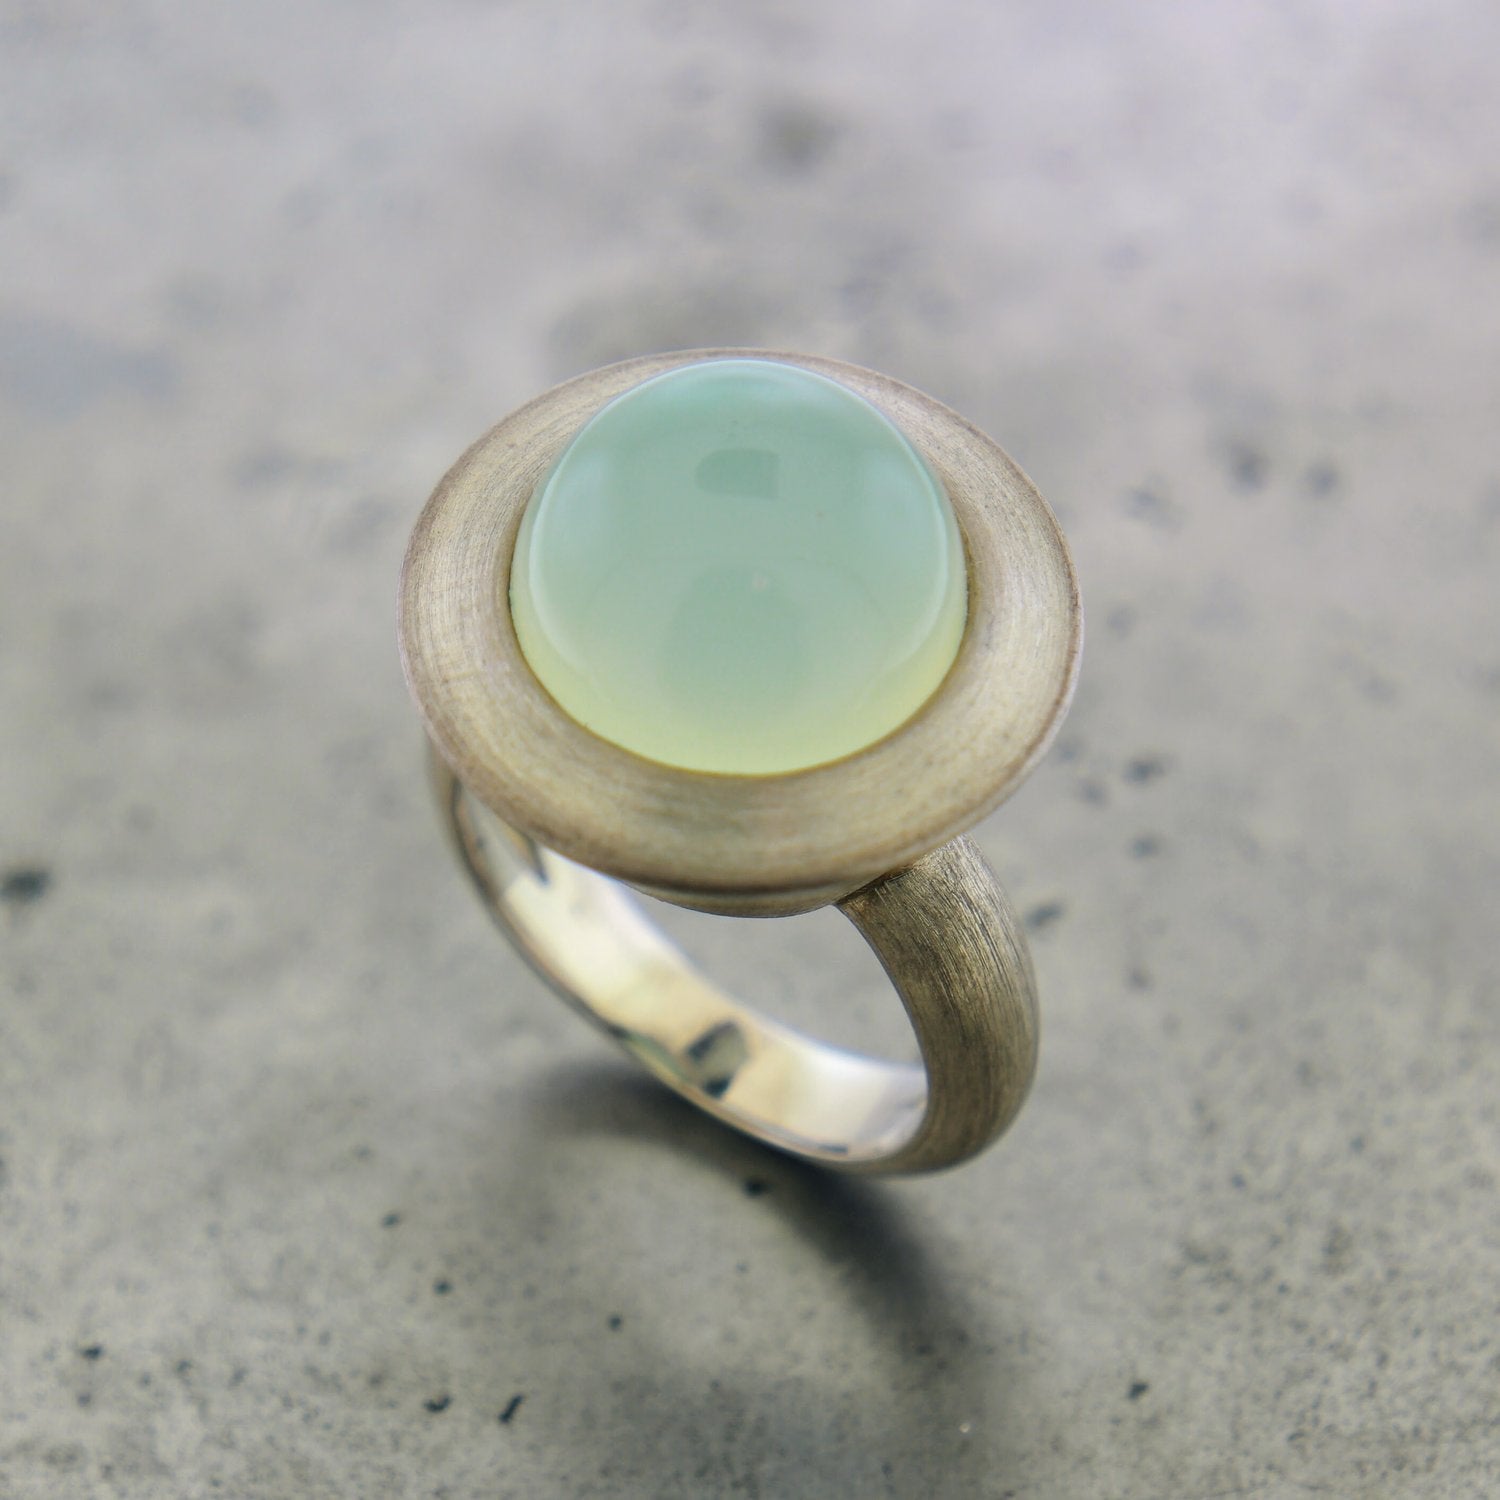 Angled aerial view of sterling silver calcedony ring. A round cabochon cut calcedony stoner (light light blue) is flush set with silver surrounding it that makes it look like an alien space ship.